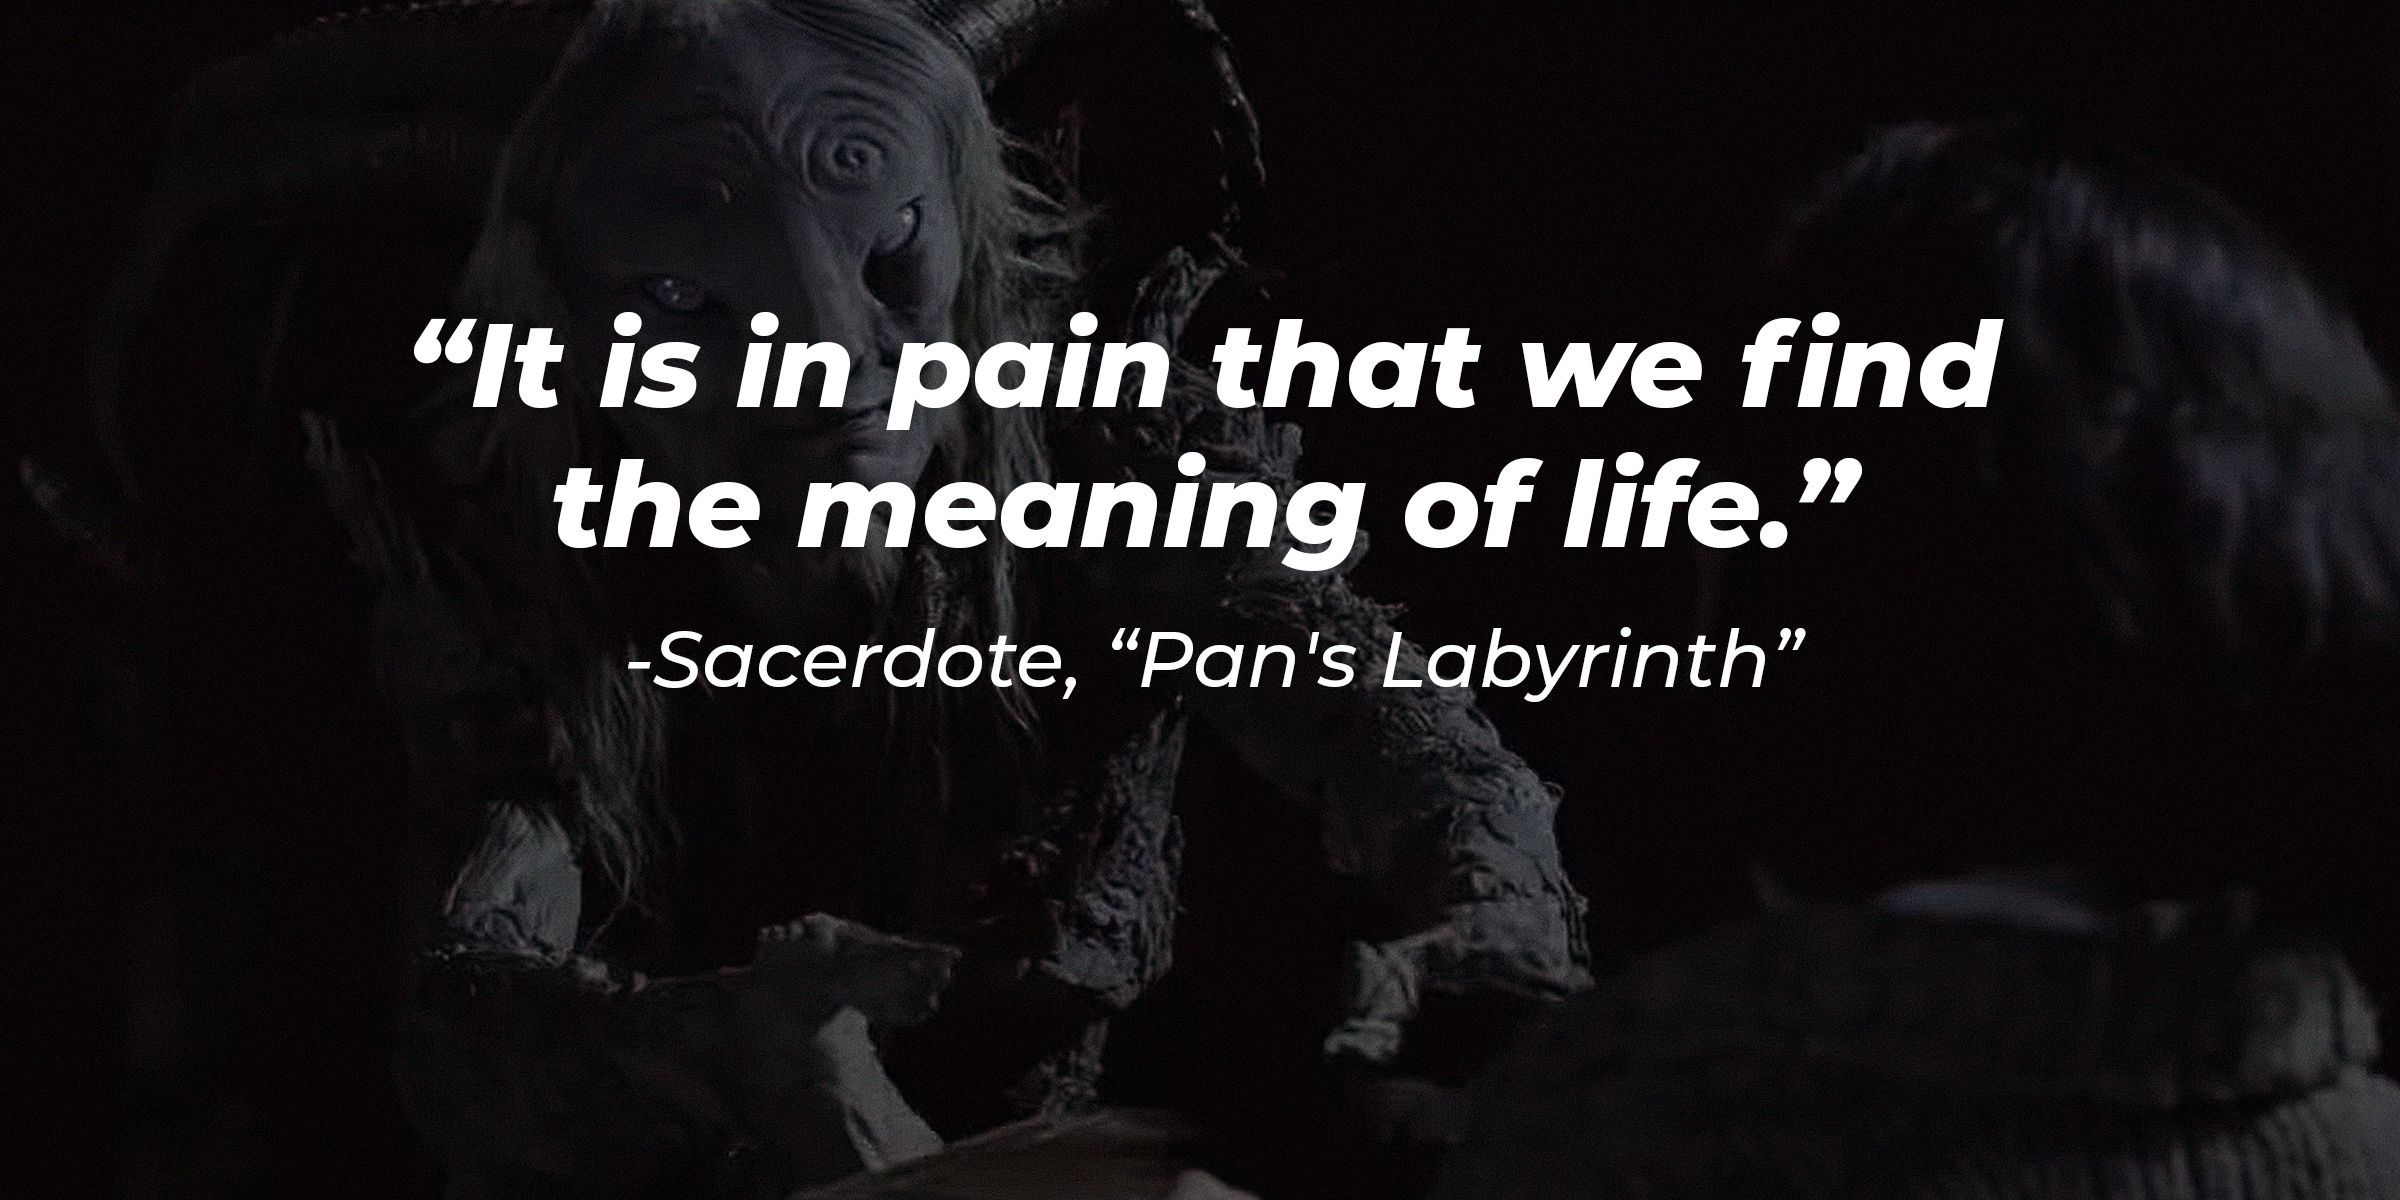 Sacerdote's quote: "It is in pain that we find the meaning of life." | Source: youtube.com/warnerbrosentertainment